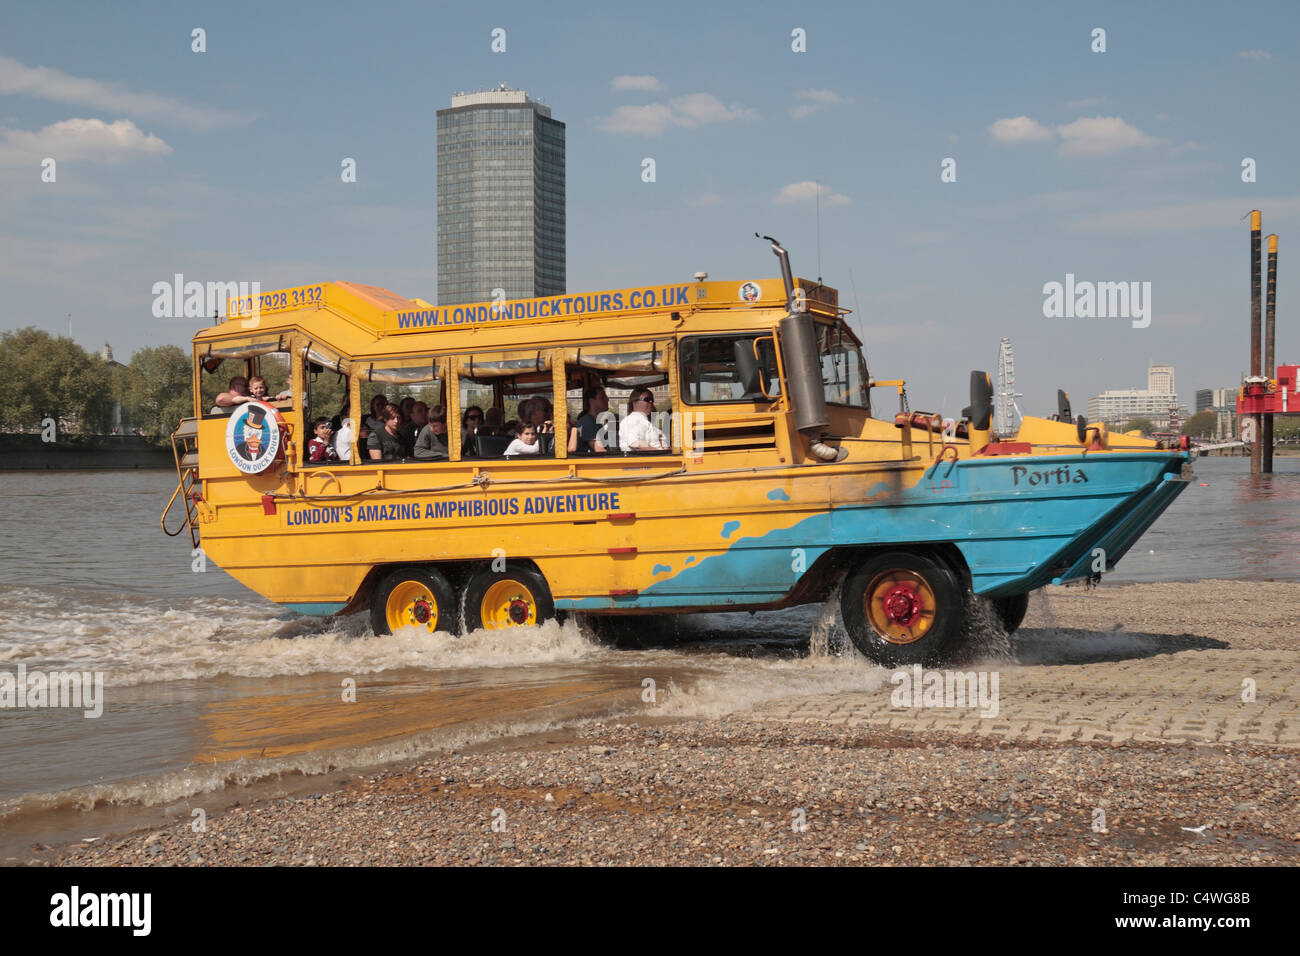 A WWII DUK-W amphibious vehicle (or Duck) converted into a 